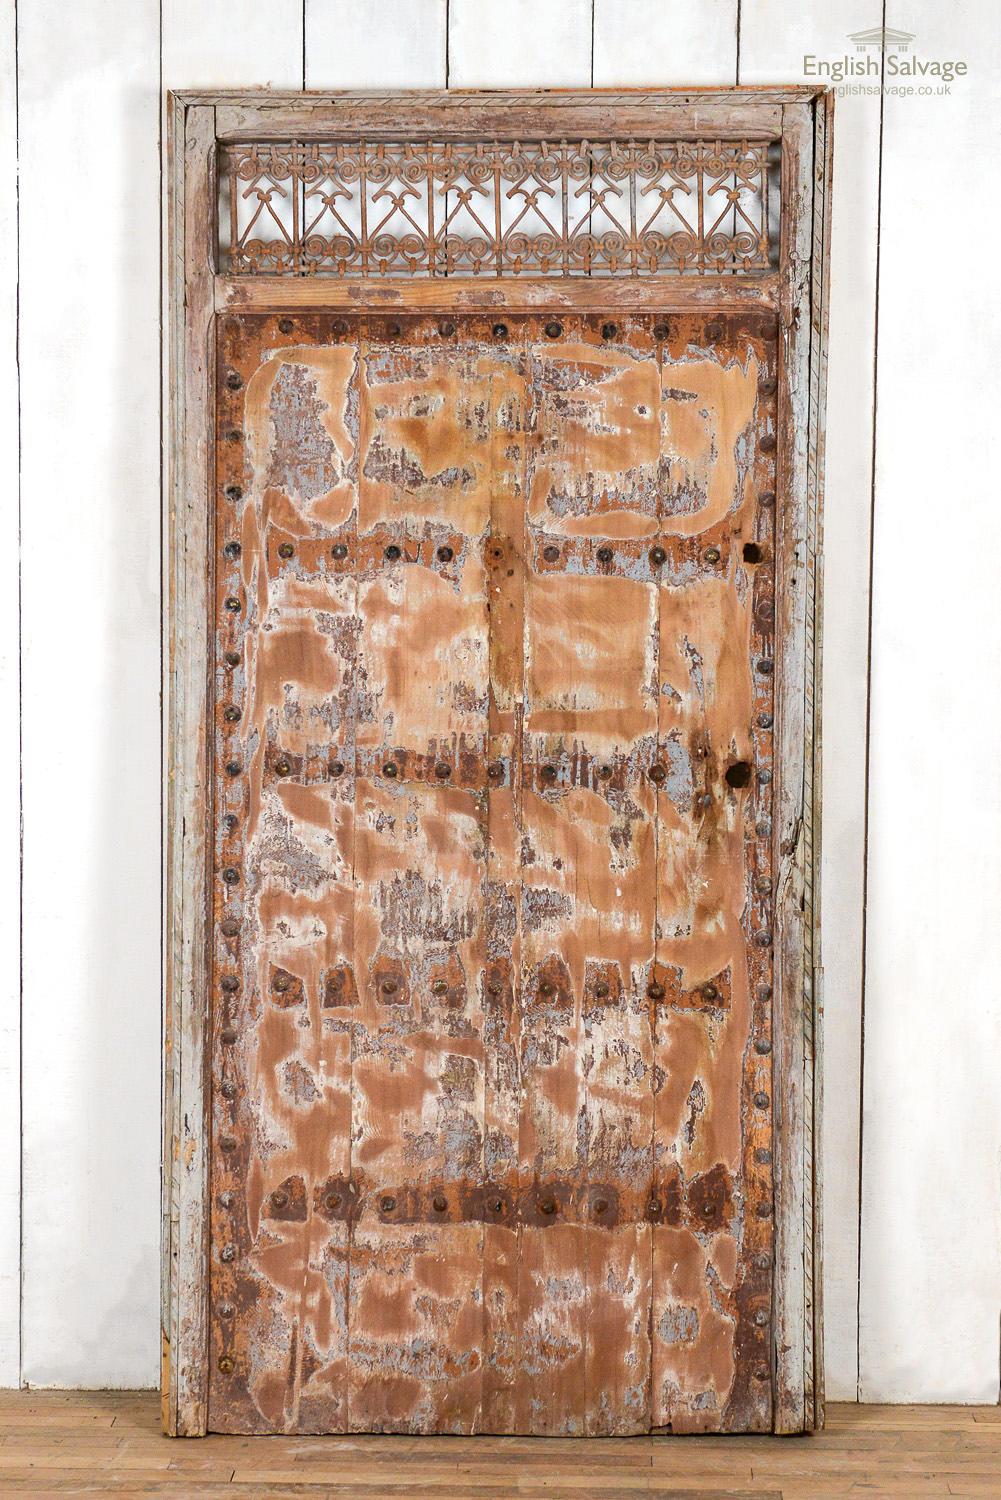 Salvaged sturdy door in frame from Morocco with a weathered patina from paint remnants and age related loss to the wood. The exterior has heavy iron studs/nail heads and the interior has unusual horizontal chamfered panels. Above the door is a